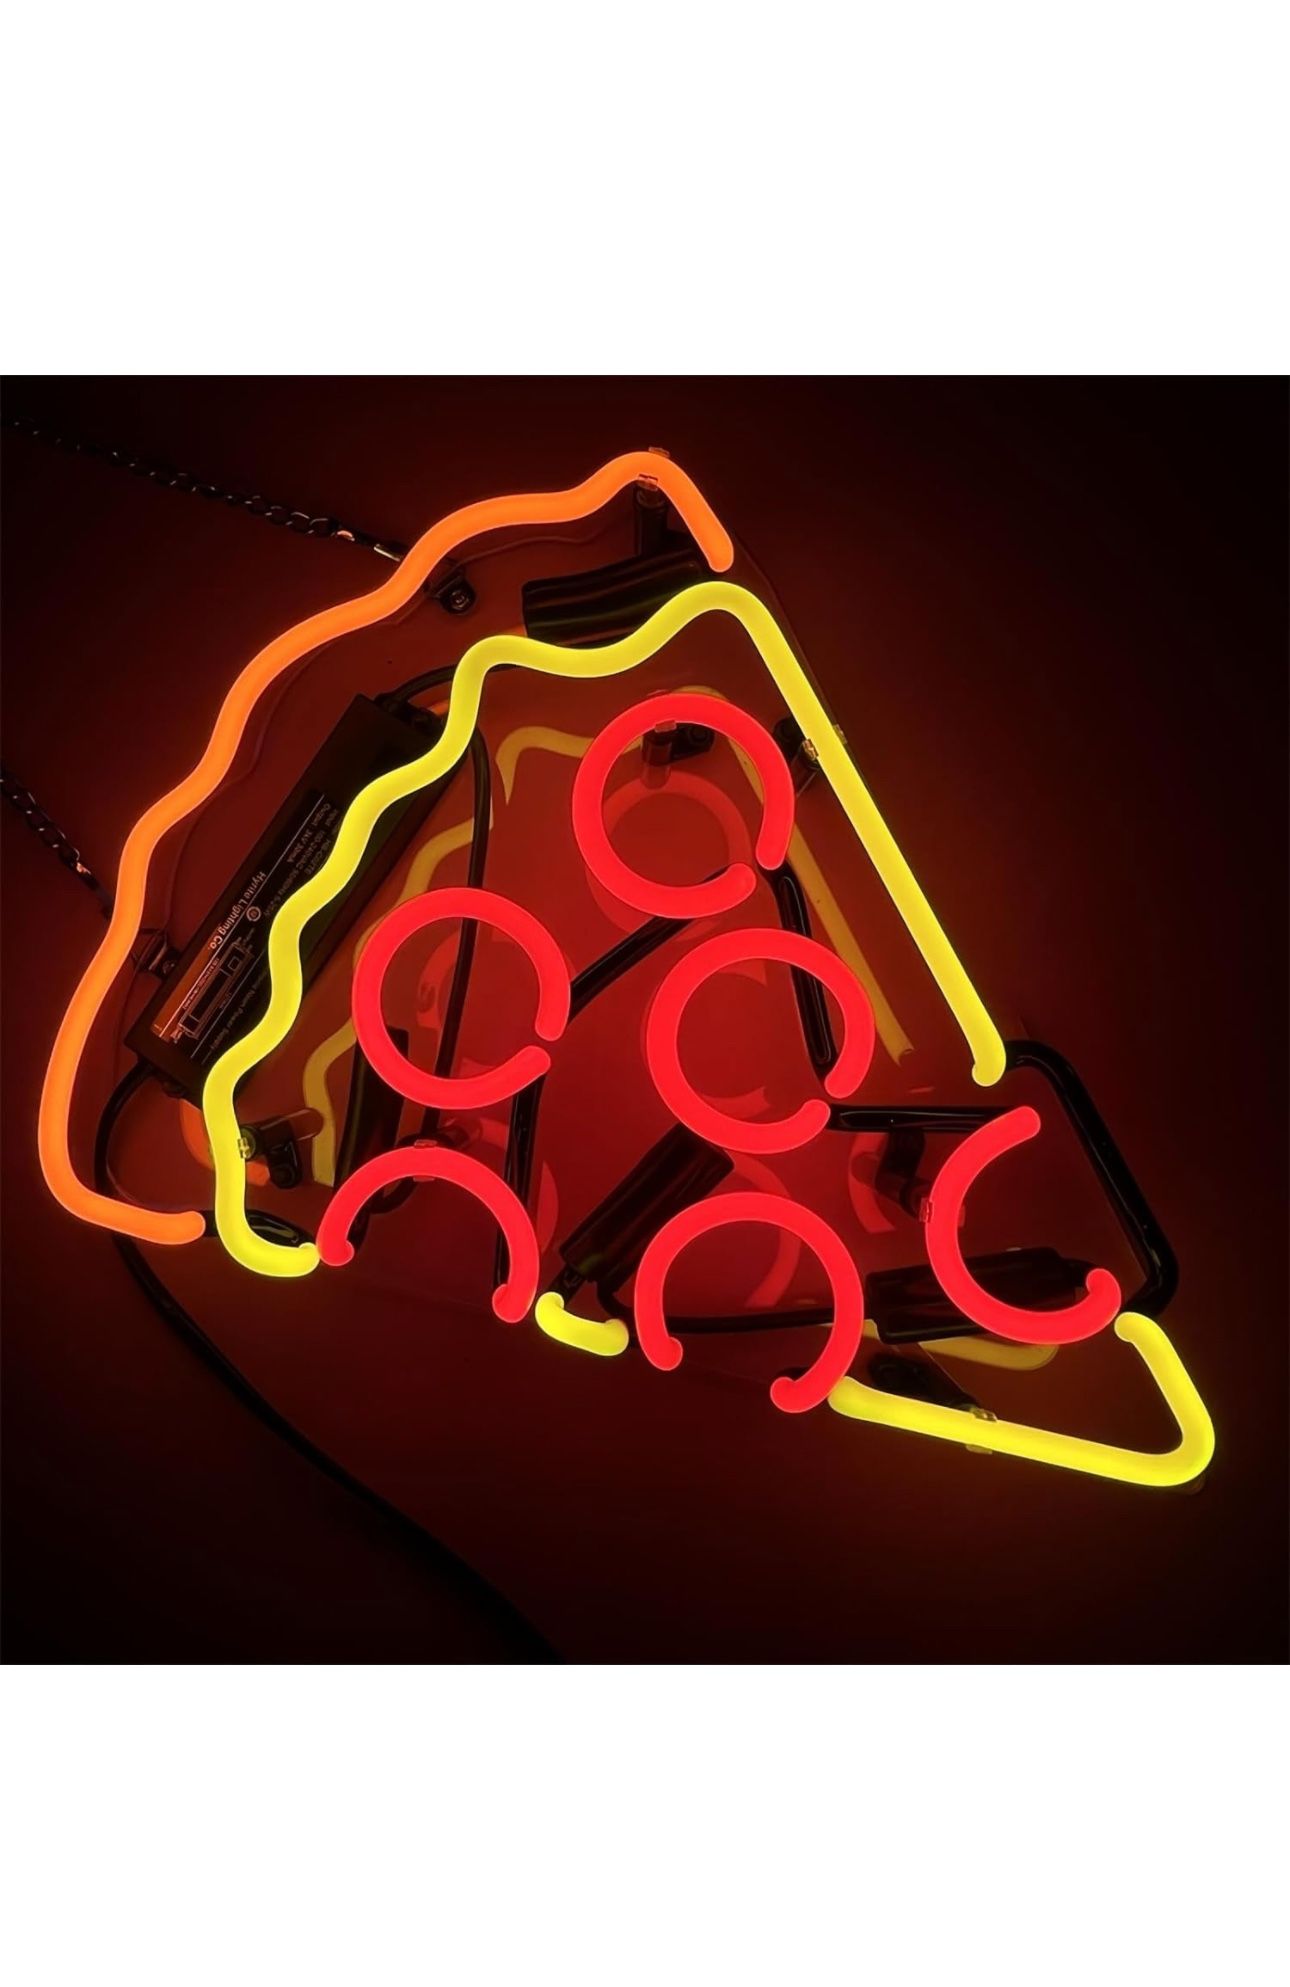 Pizza Neon Sign for Bedroom Decor LED Neon Signs Art Wall Lights for Beer Bar Club Restaurant Windows Glass Hotel Pub Cafe Wedding Birthday Party